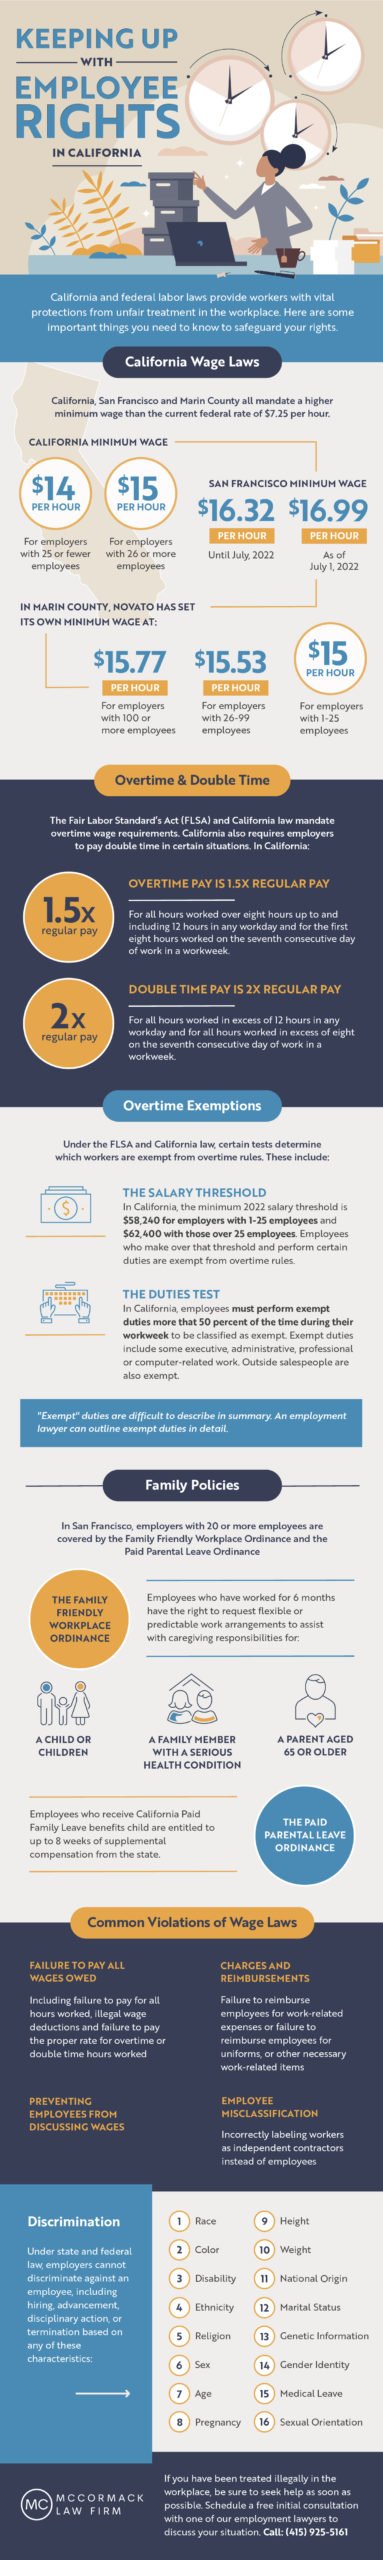 Keeping Up With Employee Rights in California Infographic